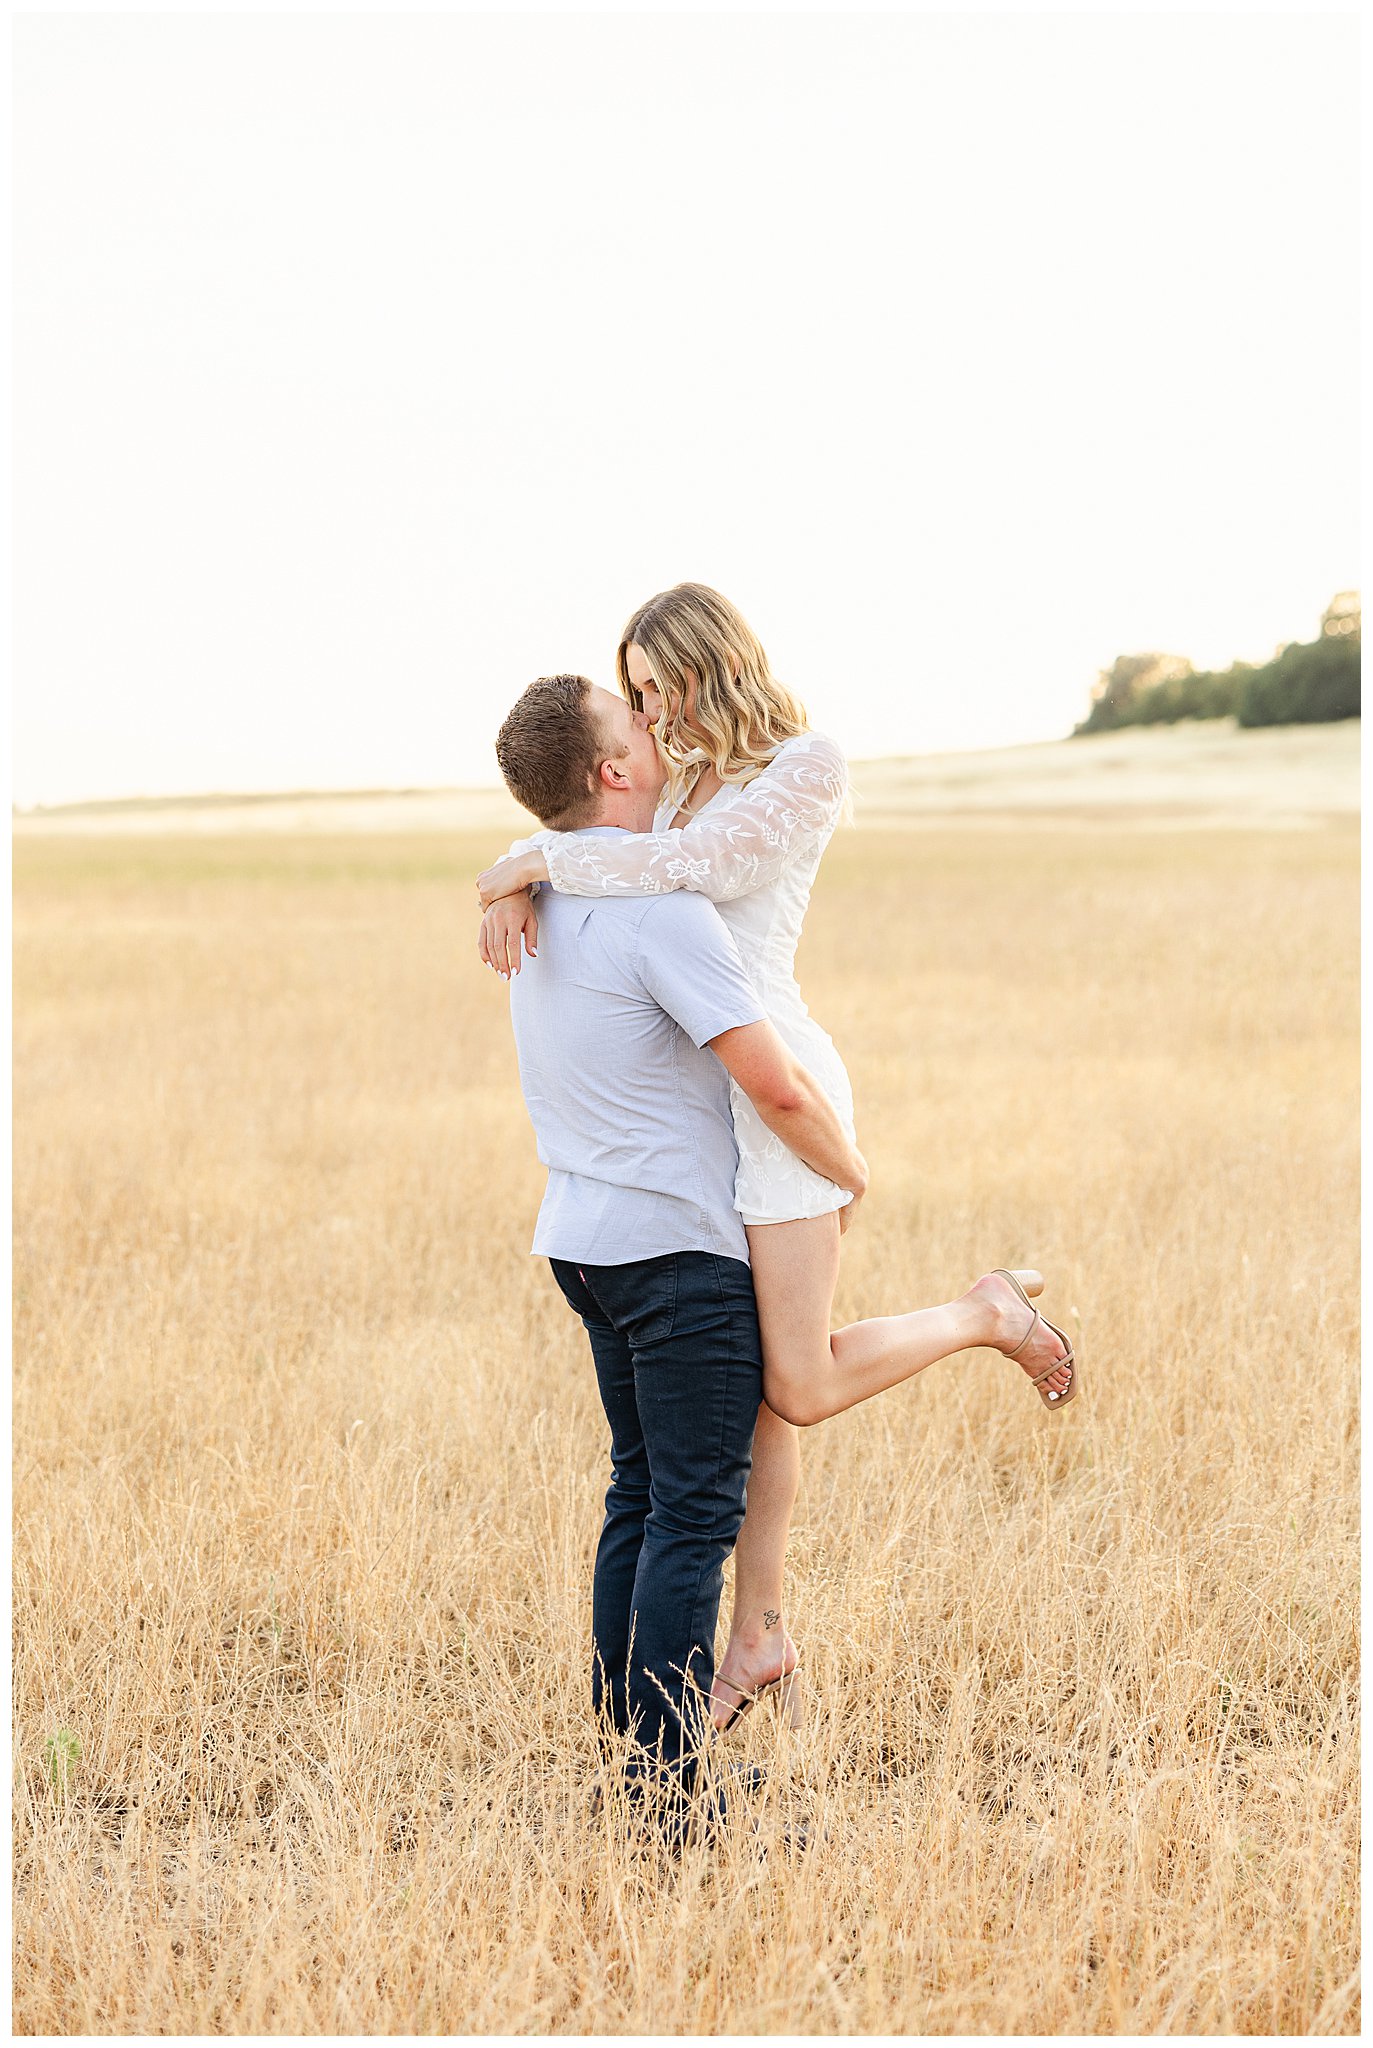 Lift and Dance in Upper Bidwell Park Engagement Session | Elyssa + Jack